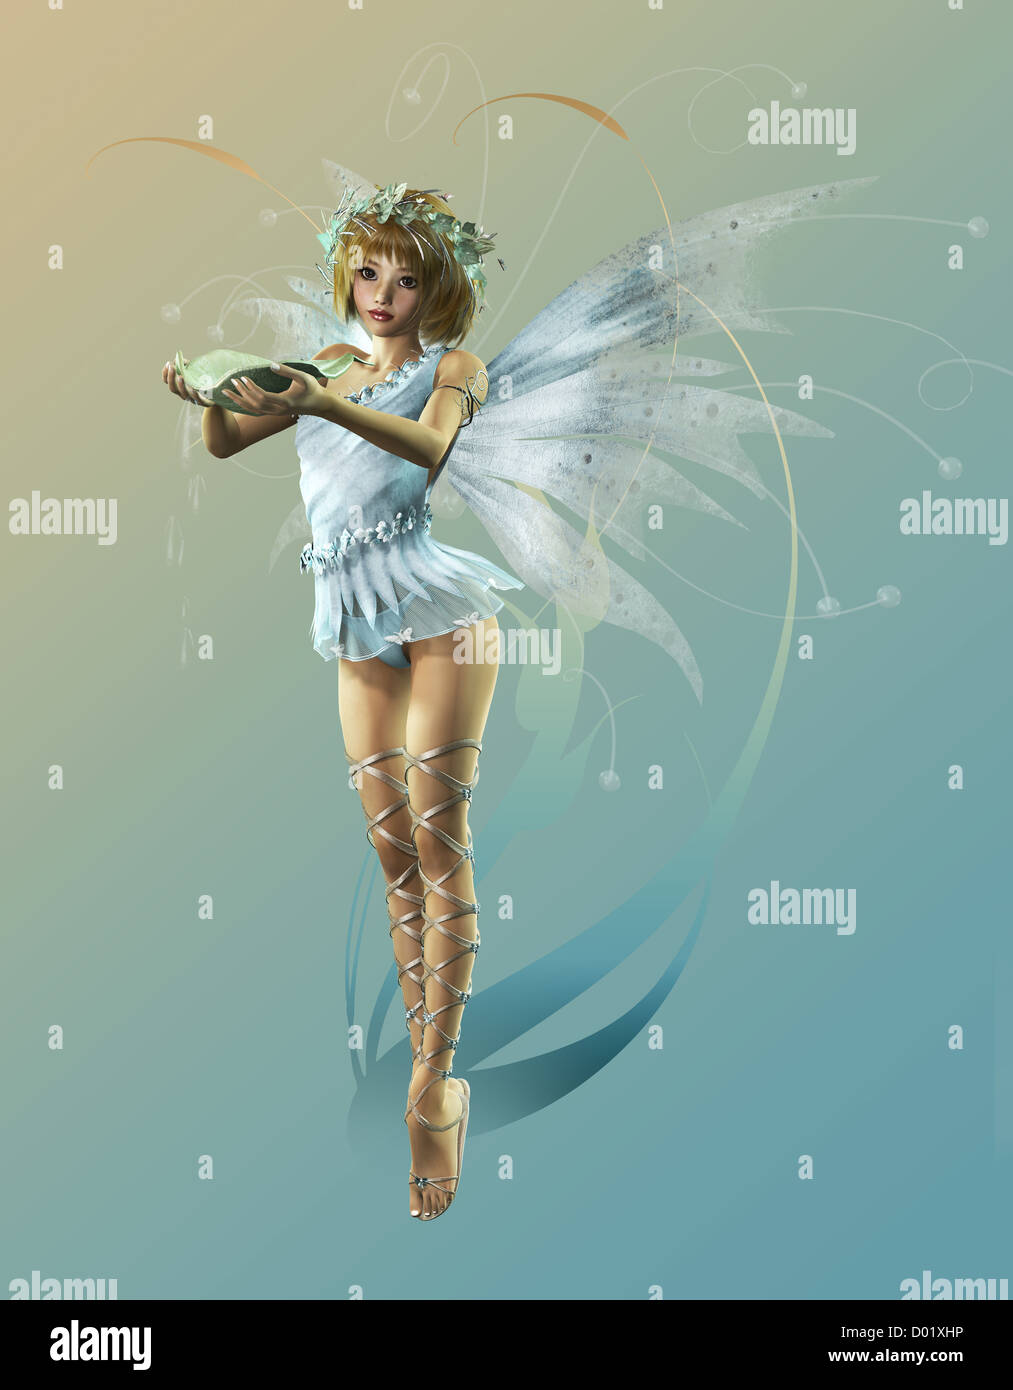 A cute Fairy with Wings and Wreath Stock Photo